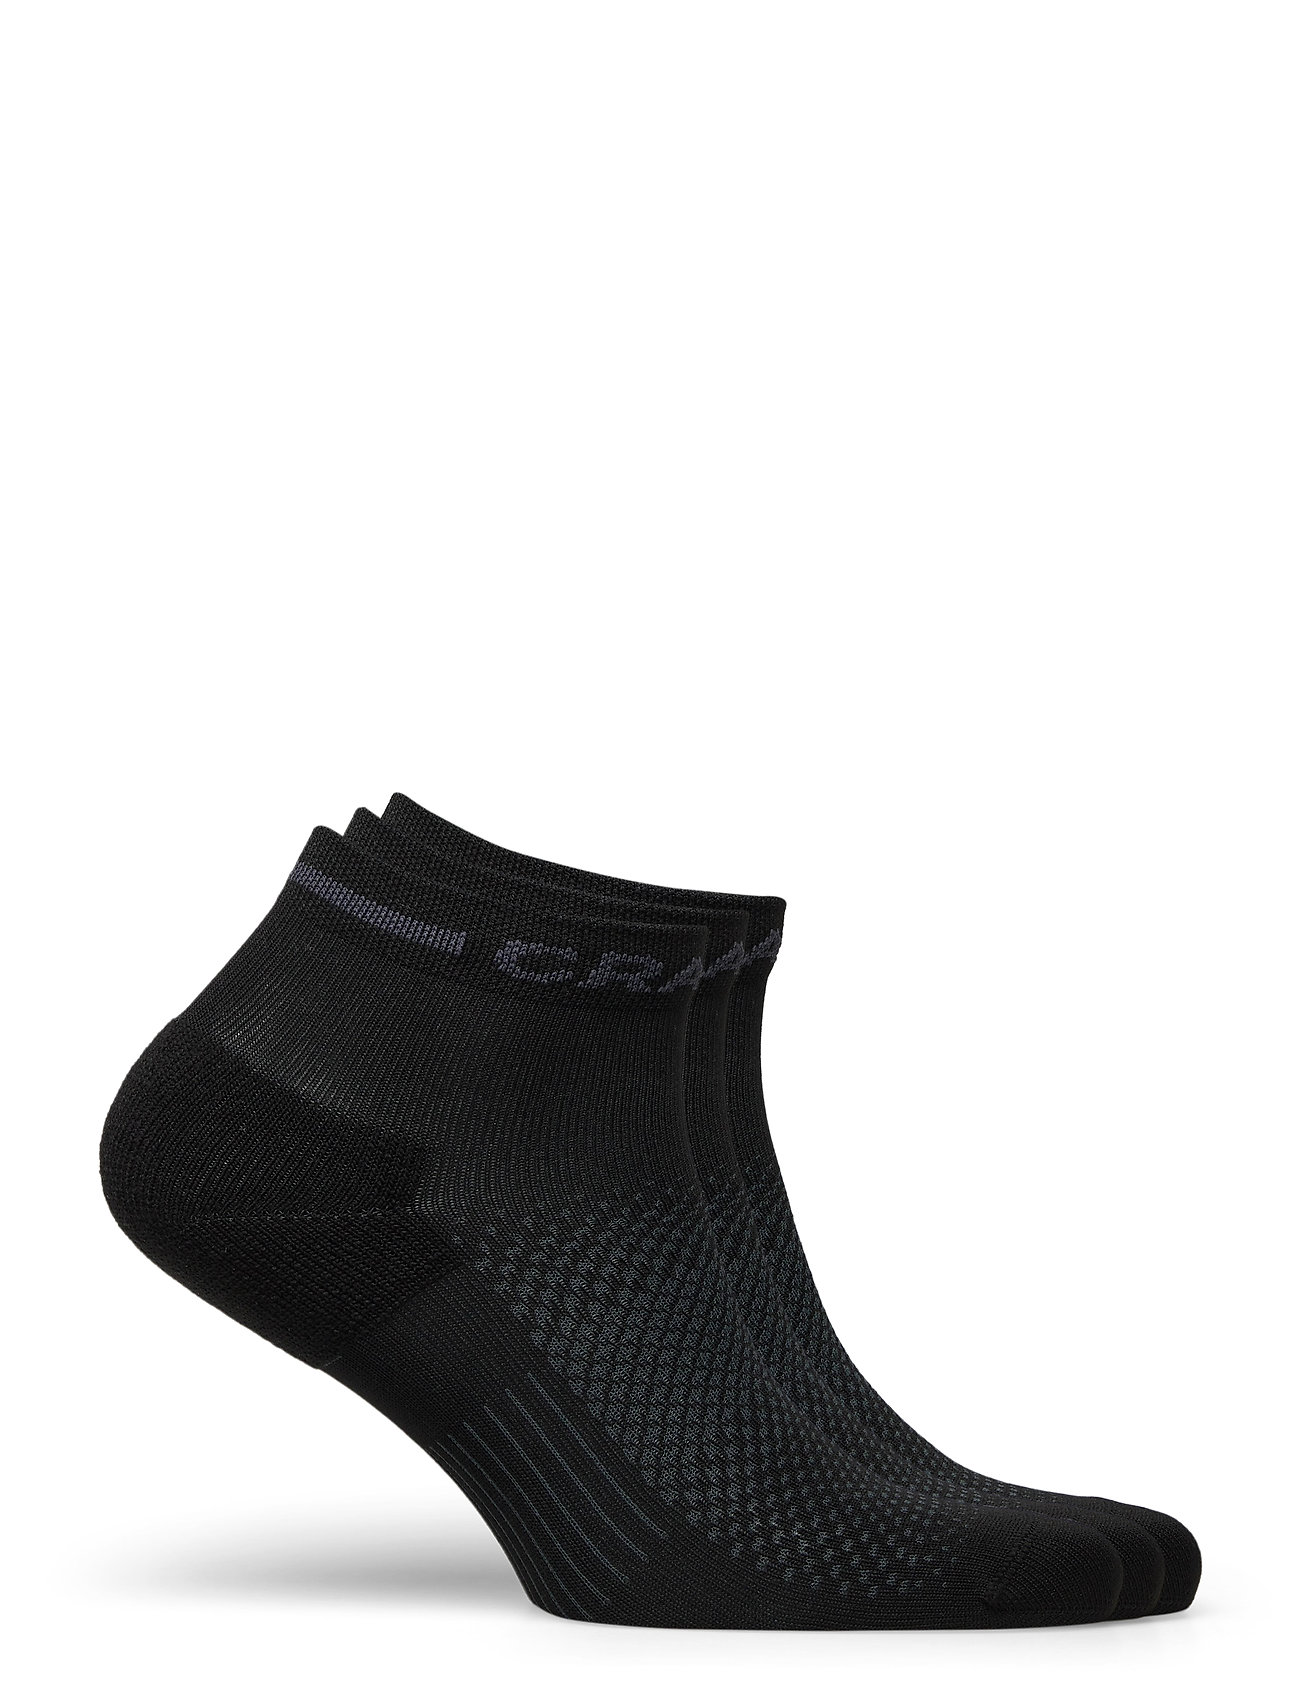 Craft - Core Dry Mid Sock 3-Pack - lowest prices - black - 1